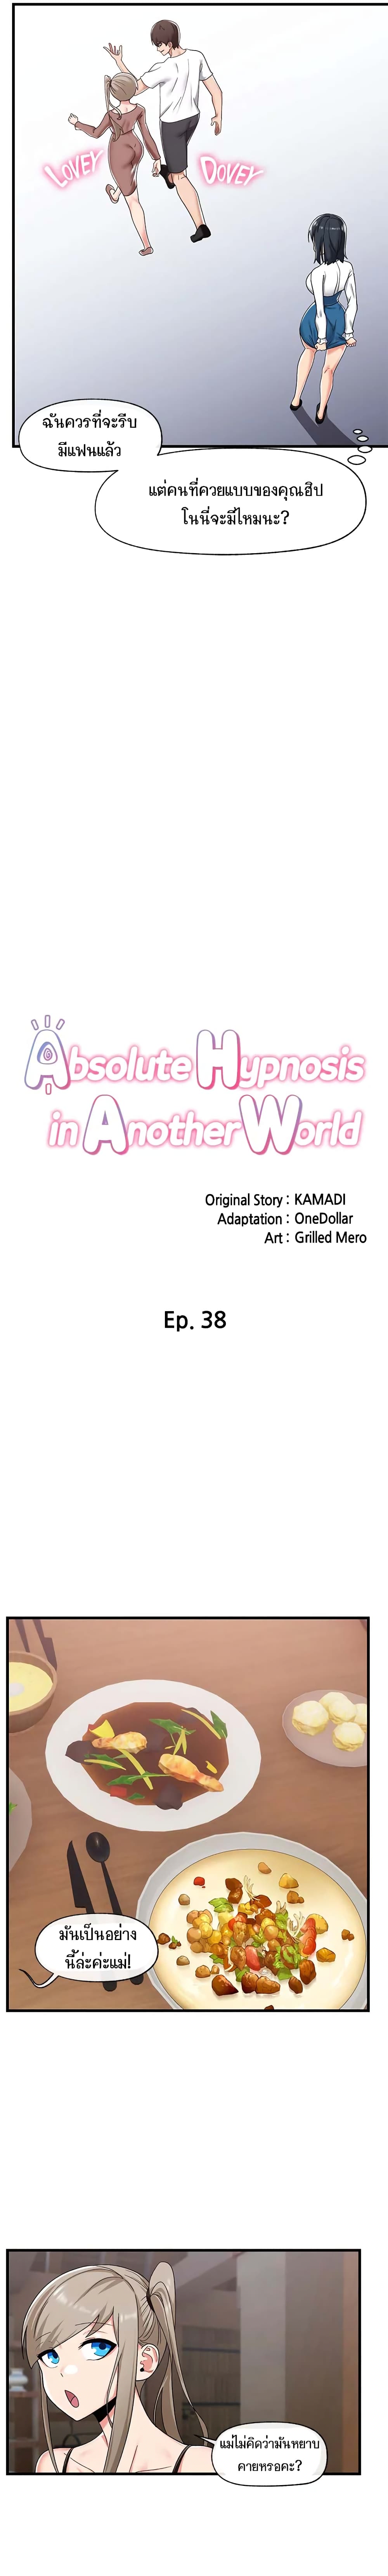 Absolute Hypnosis in Another World 38-38